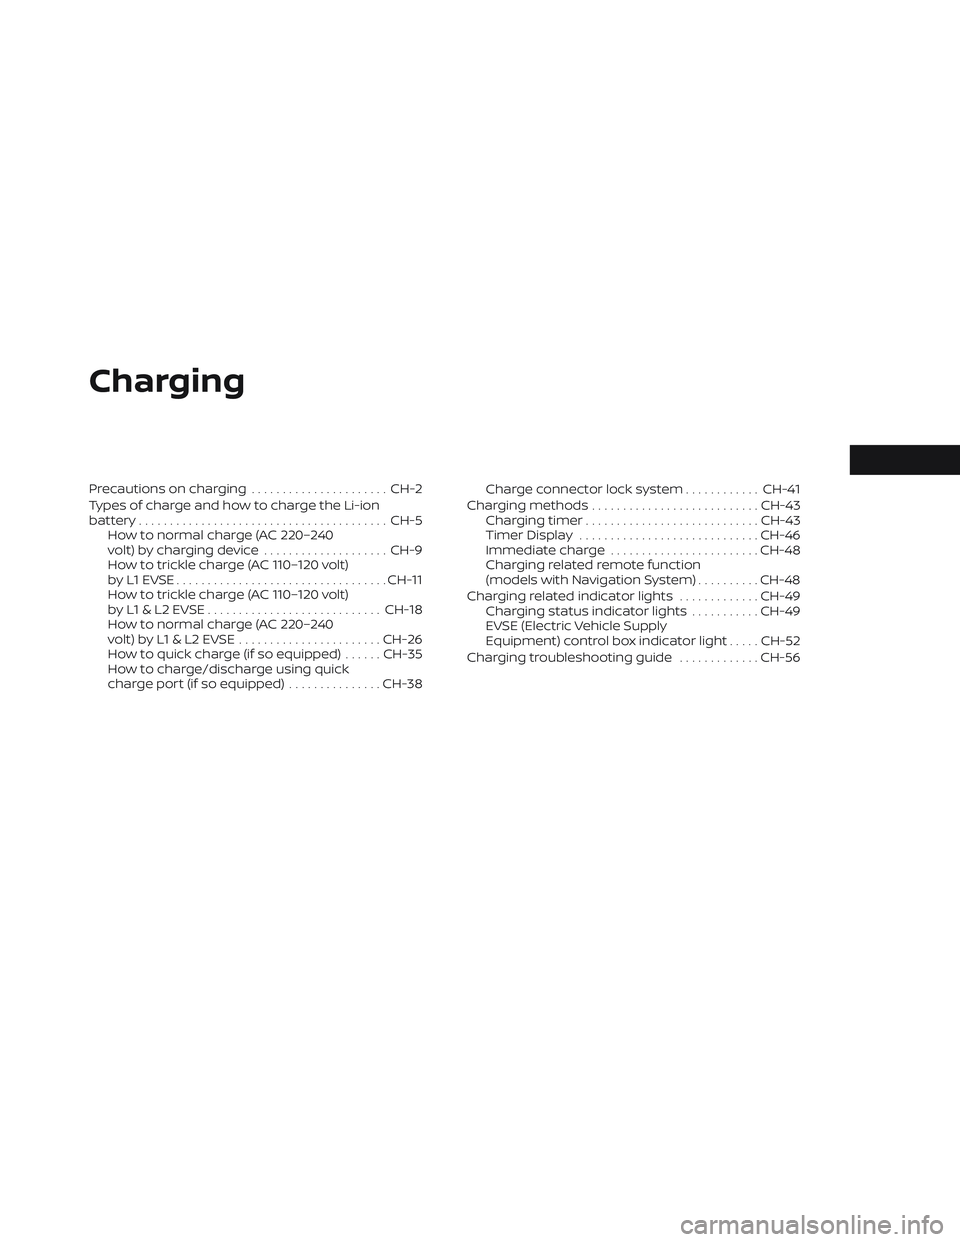 NISSAN LEAF 2022  Owner´s Manual Charging
Precautions on charging......................CH-2
Types of charge and how to charge the Li-ion
battery........................................ CH-5
How to normal charge (AC 220–240
volt) by